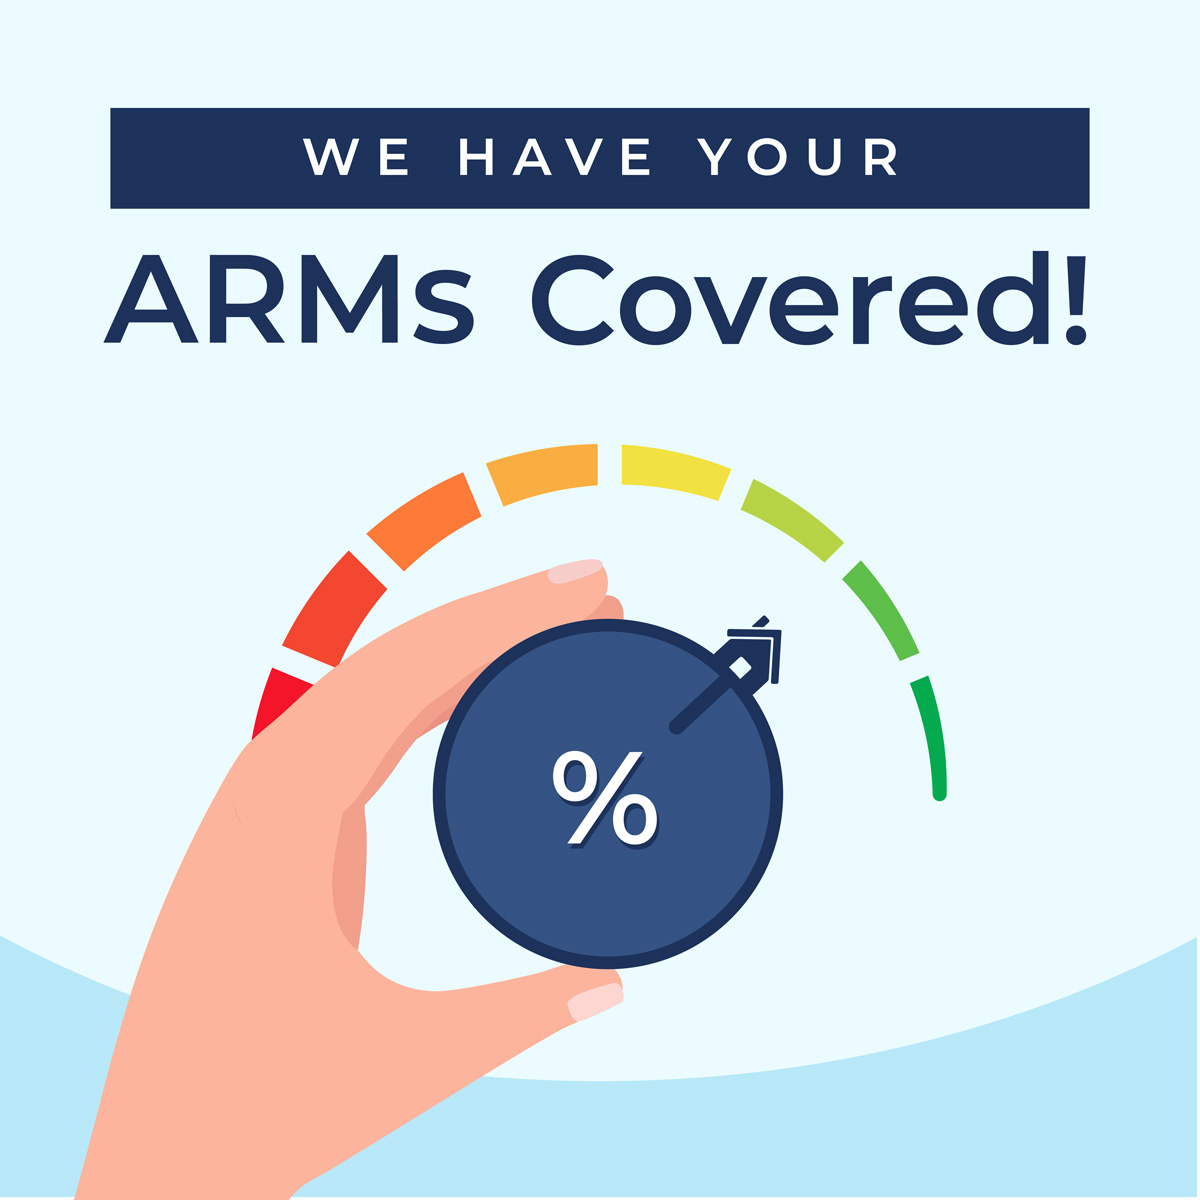 Eliminate working out your ARMs in the gym because we've got you covered. Call us today to find out how our adjustable-rate mortgage can benefit you. NMLS2092258 #vegasloanofficer #californiamortgage #mortgagebroker #californiarealestate #arizonarealestate #stoppayingrent